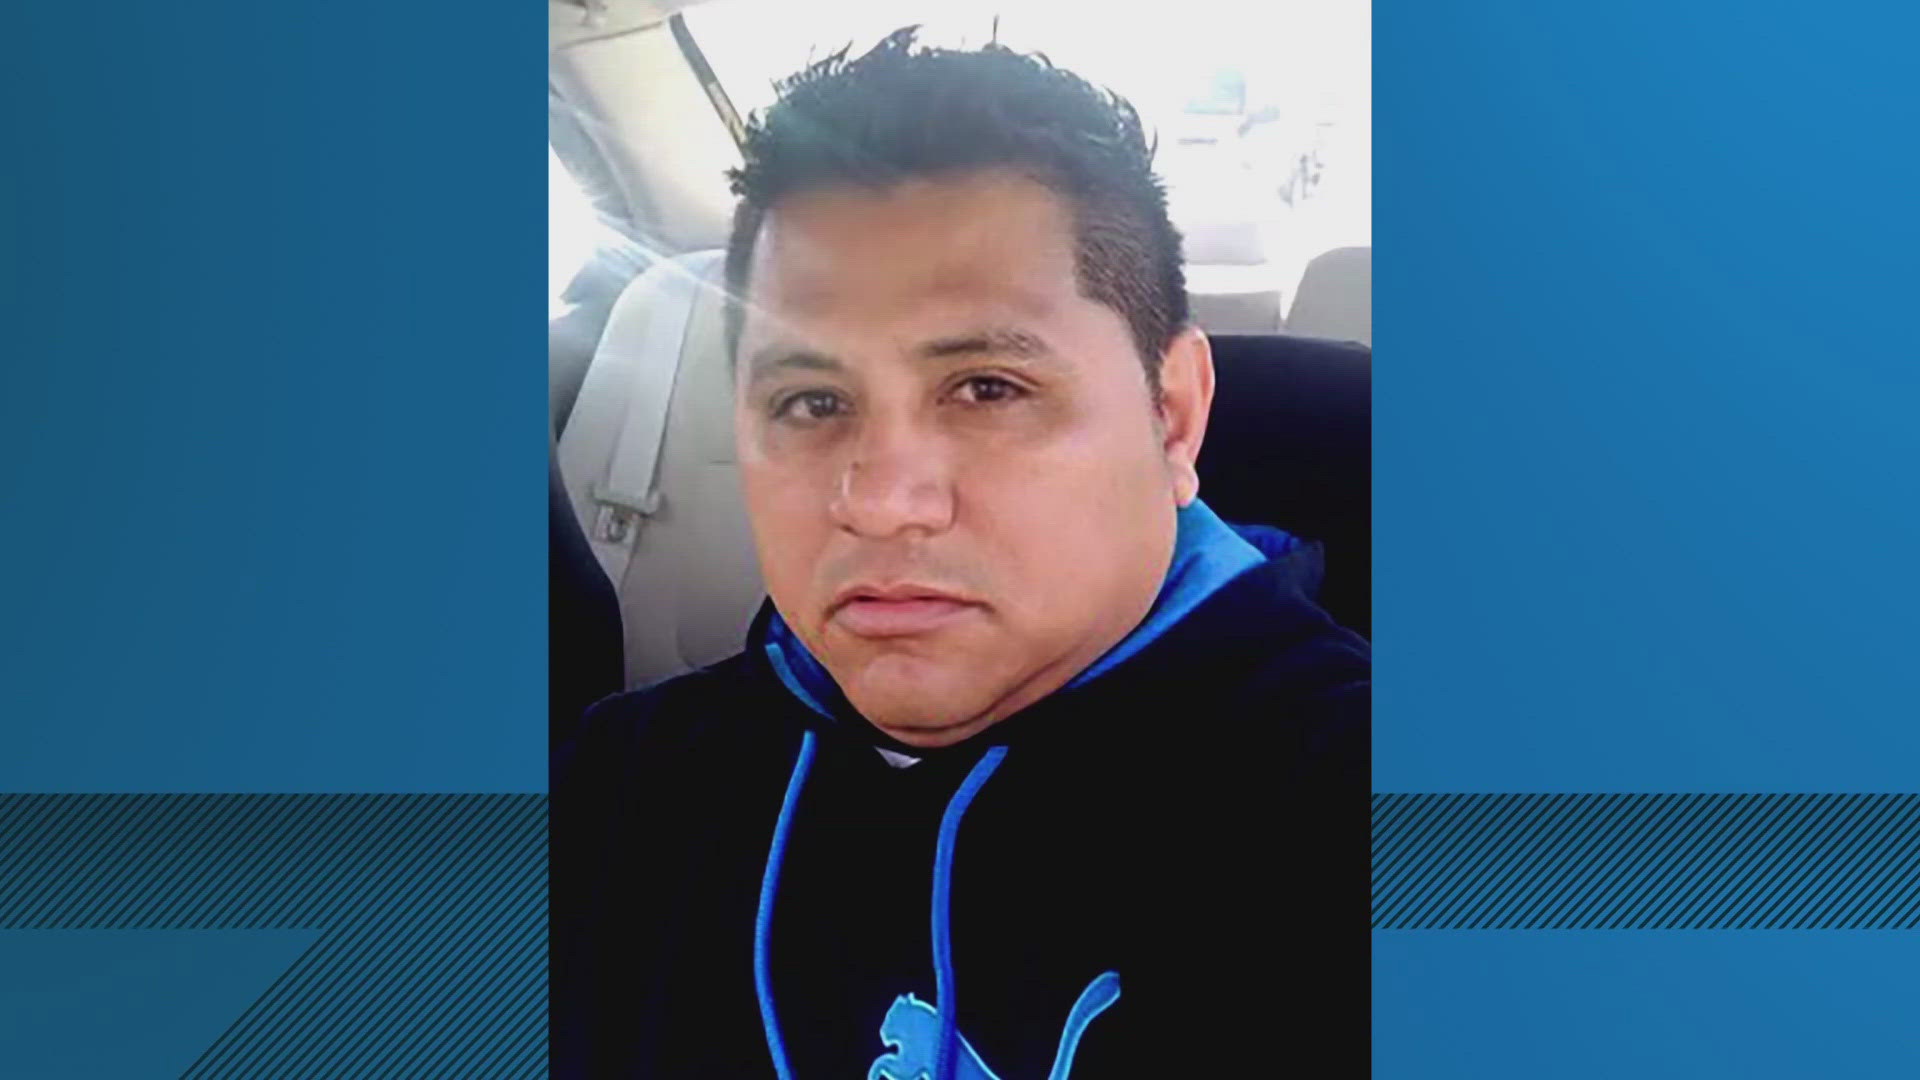 Officials say the body of a fifth construction worker was pulled from the water Wednesday night. He's been identified as 49-year-old Miguel Luna Gonzalez.